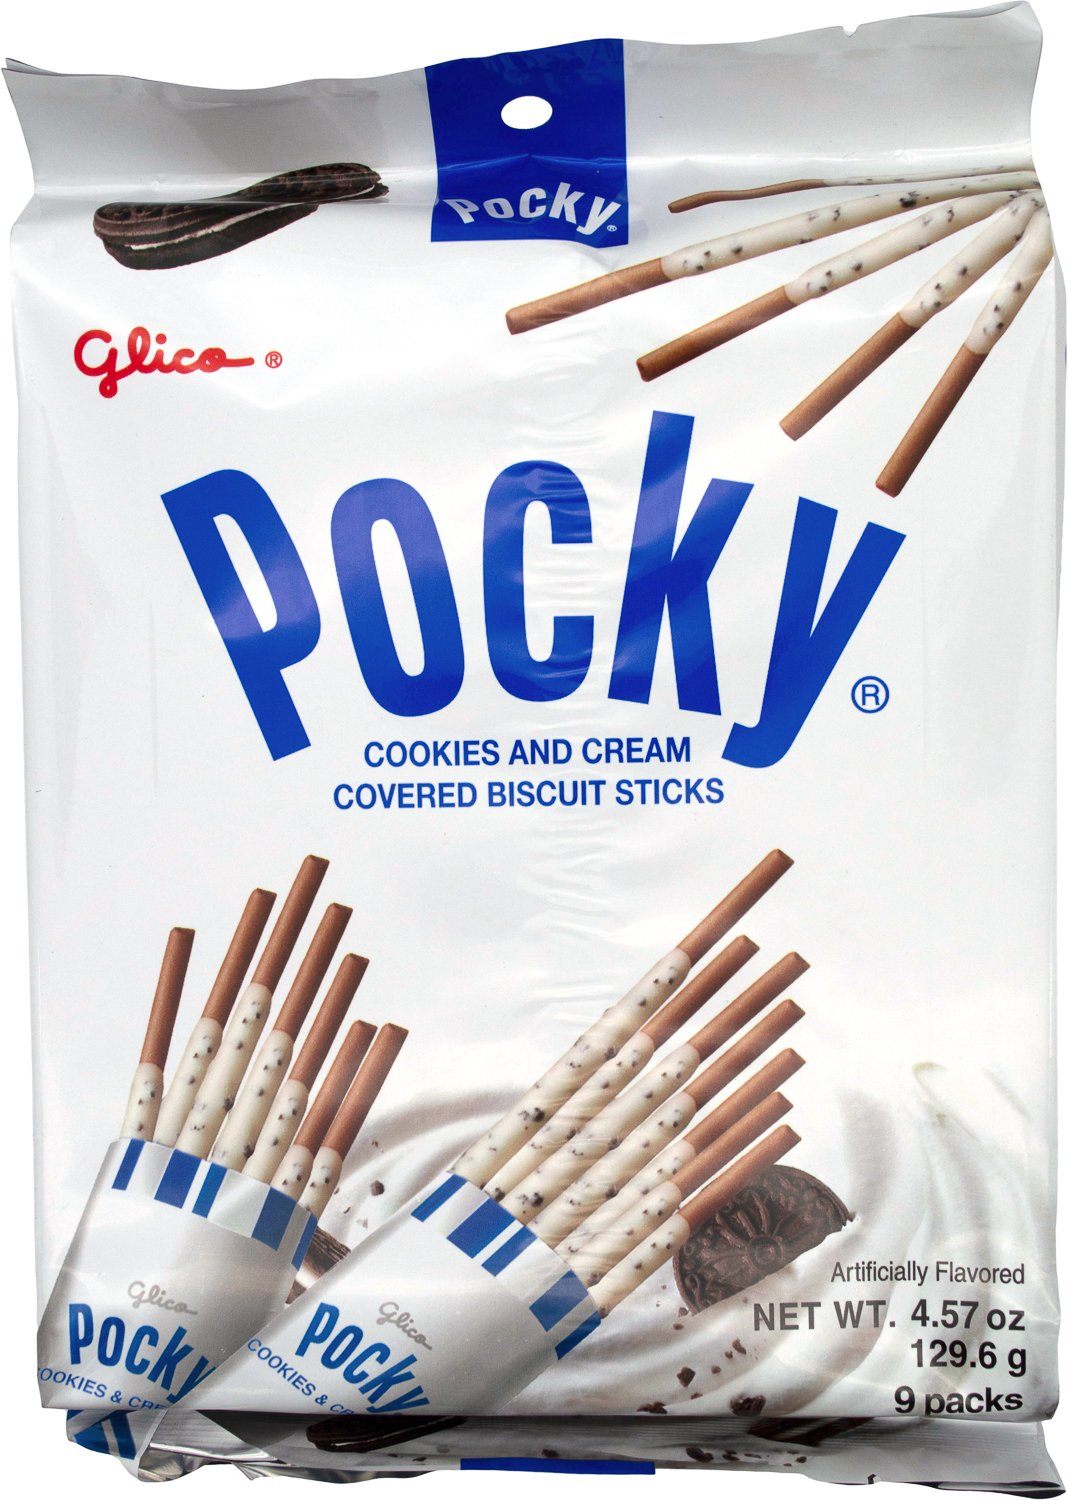 Pocky Cream Covered Biscuit Sticks Glico Cookies & Cream 4.57 Ounce 